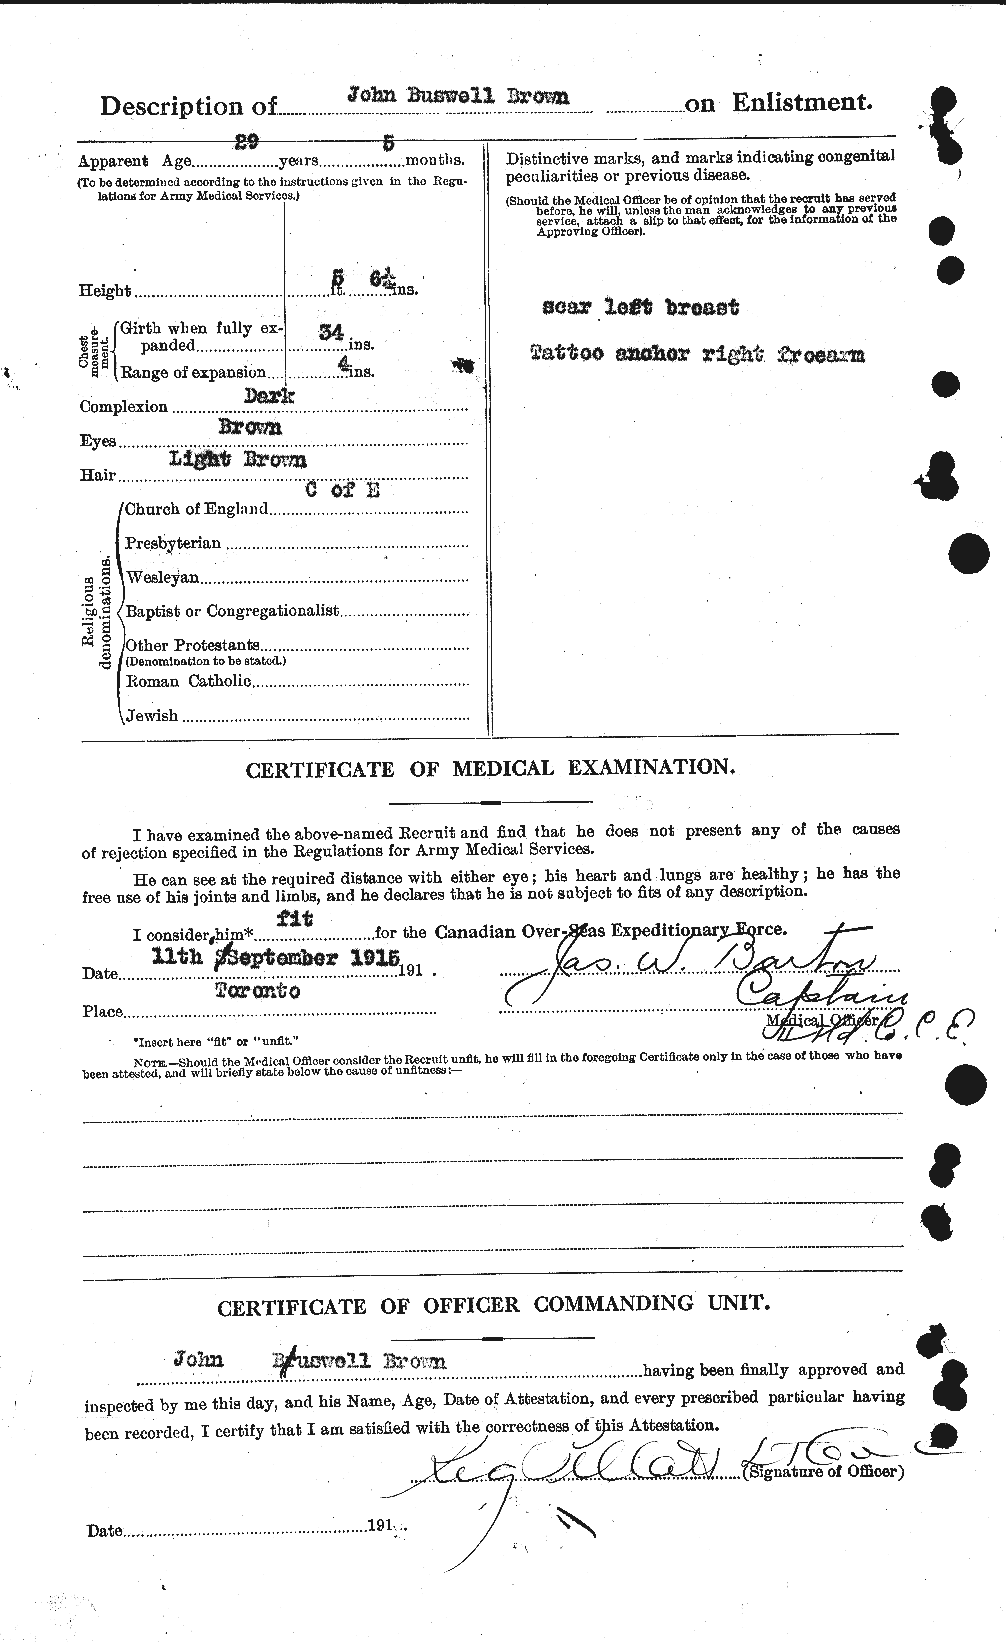 Personnel Records of the First World War - CEF 264573b